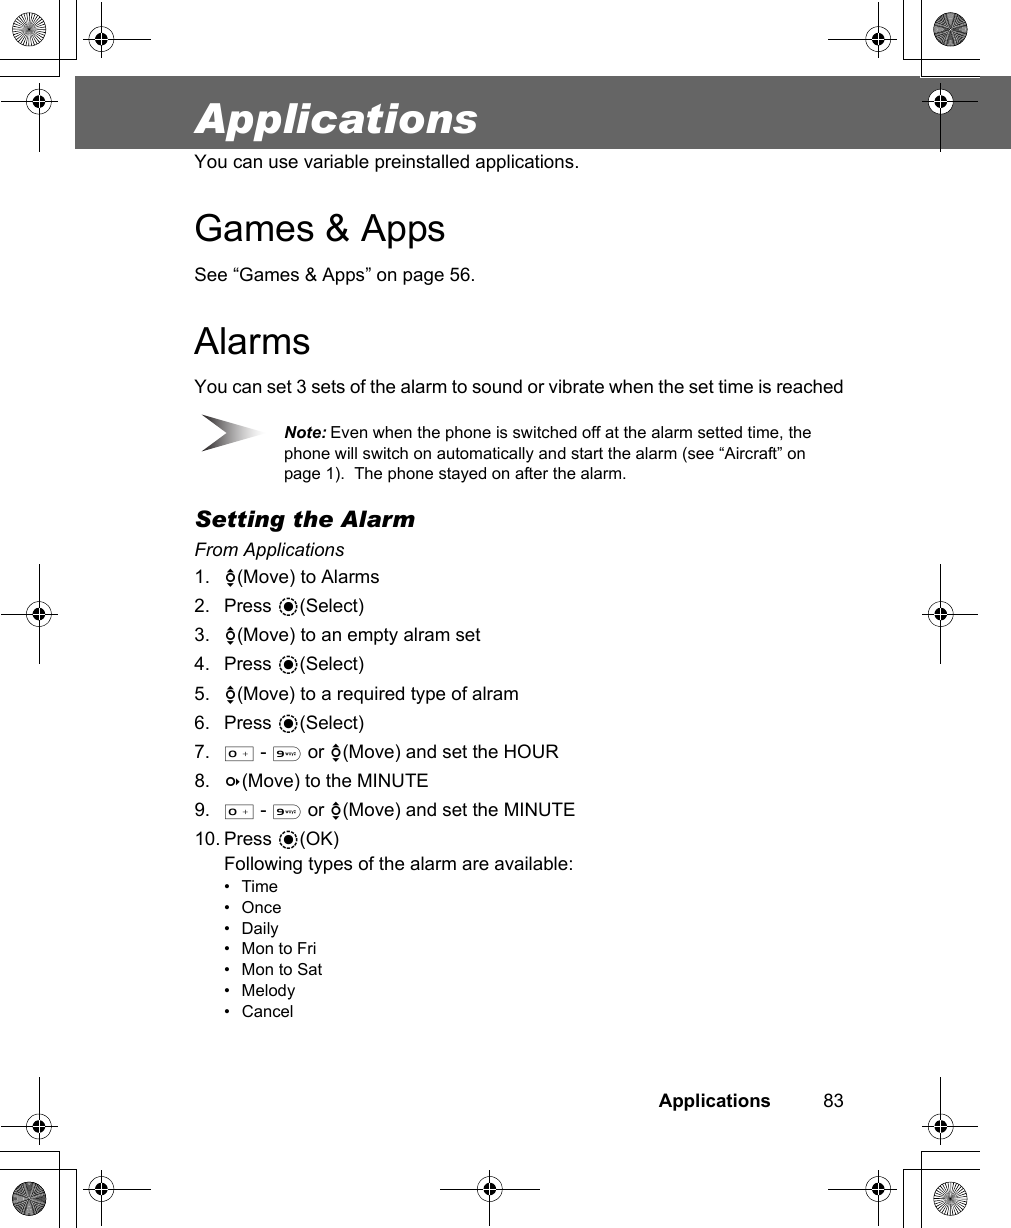 Applications          83ApplicationsYou can use variable preinstalled applications.Games &amp; AppsSee “Games &amp; Apps” on page 56.AlarmsYou can set 3 sets of the alarm to sound or vibrate when the set time is reachedNote: Even when the phone is switched off at the alarm setted time, the phone will switch on automatically and start the alarm (see “Aircraft” on page 1).  The phone stayed on after the alarm.Setting the AlarmFrom Applications1. 4(Move) to Alarms2. Press &lt;(Select)3. 4(Move) to an empty alram set4. Press &lt;(Select)5. 4(Move) to a required type of alram6. Press &lt;(Select)7. # - , or 4(Move) and set the HOUR8. 3(Move) to the MINUTE9. # - , or 4(Move) and set the MINUTE10. Press &lt;(OK)Following types of the alarm are available:•Time•Once•Daily• Mon to Fri• Mon to Sat• Melody• Cancel